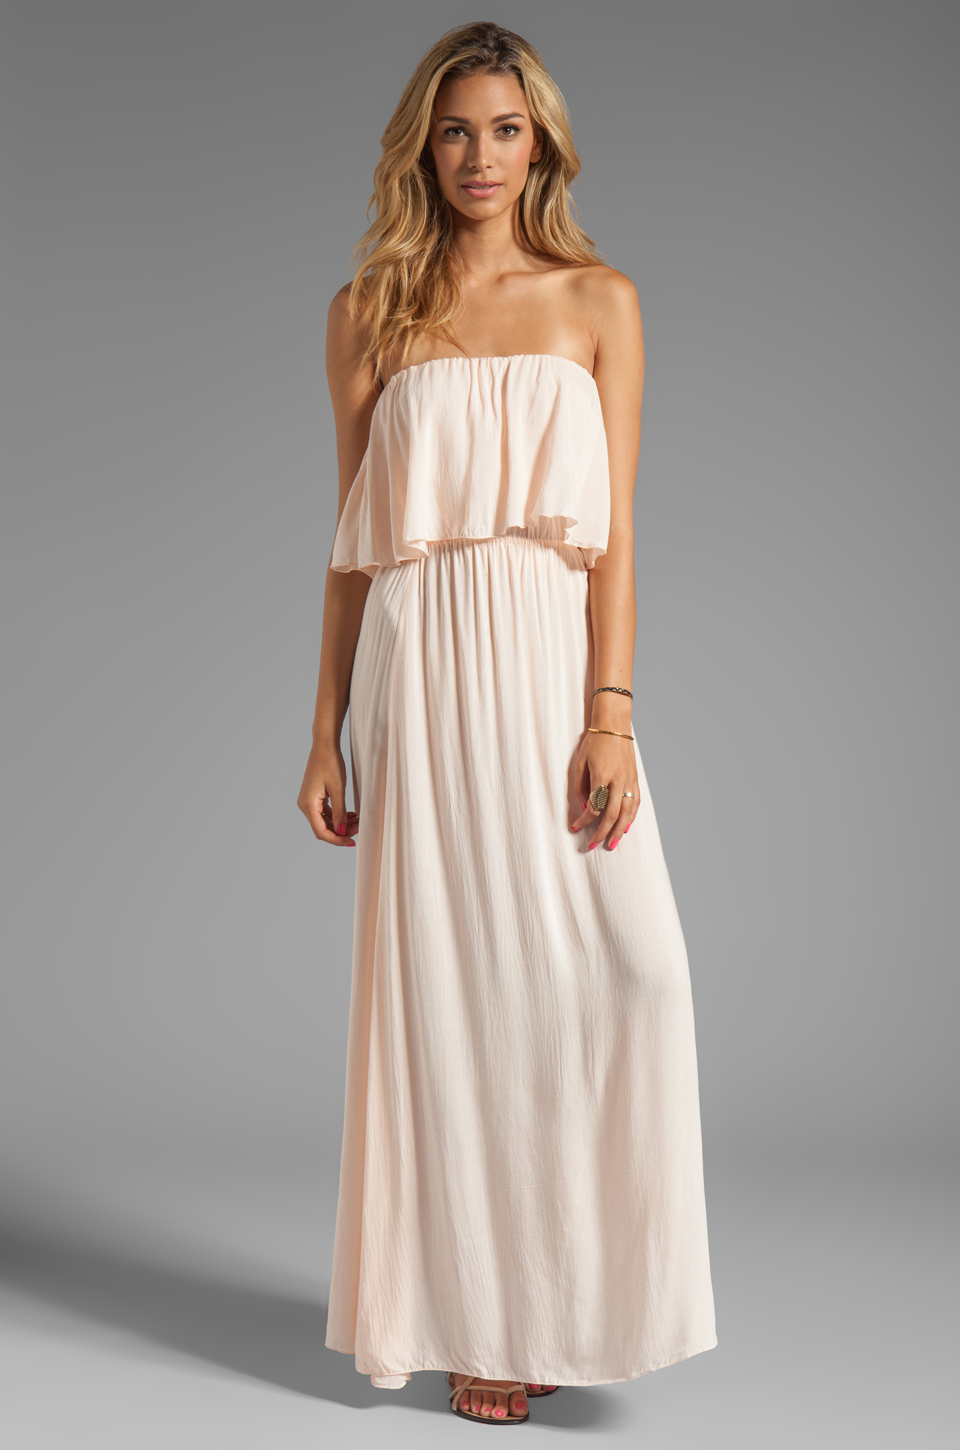 Indah Havi Rayon Crepe Strapless Maxi Dress With Flounce Top In Blush In Pink Lyst